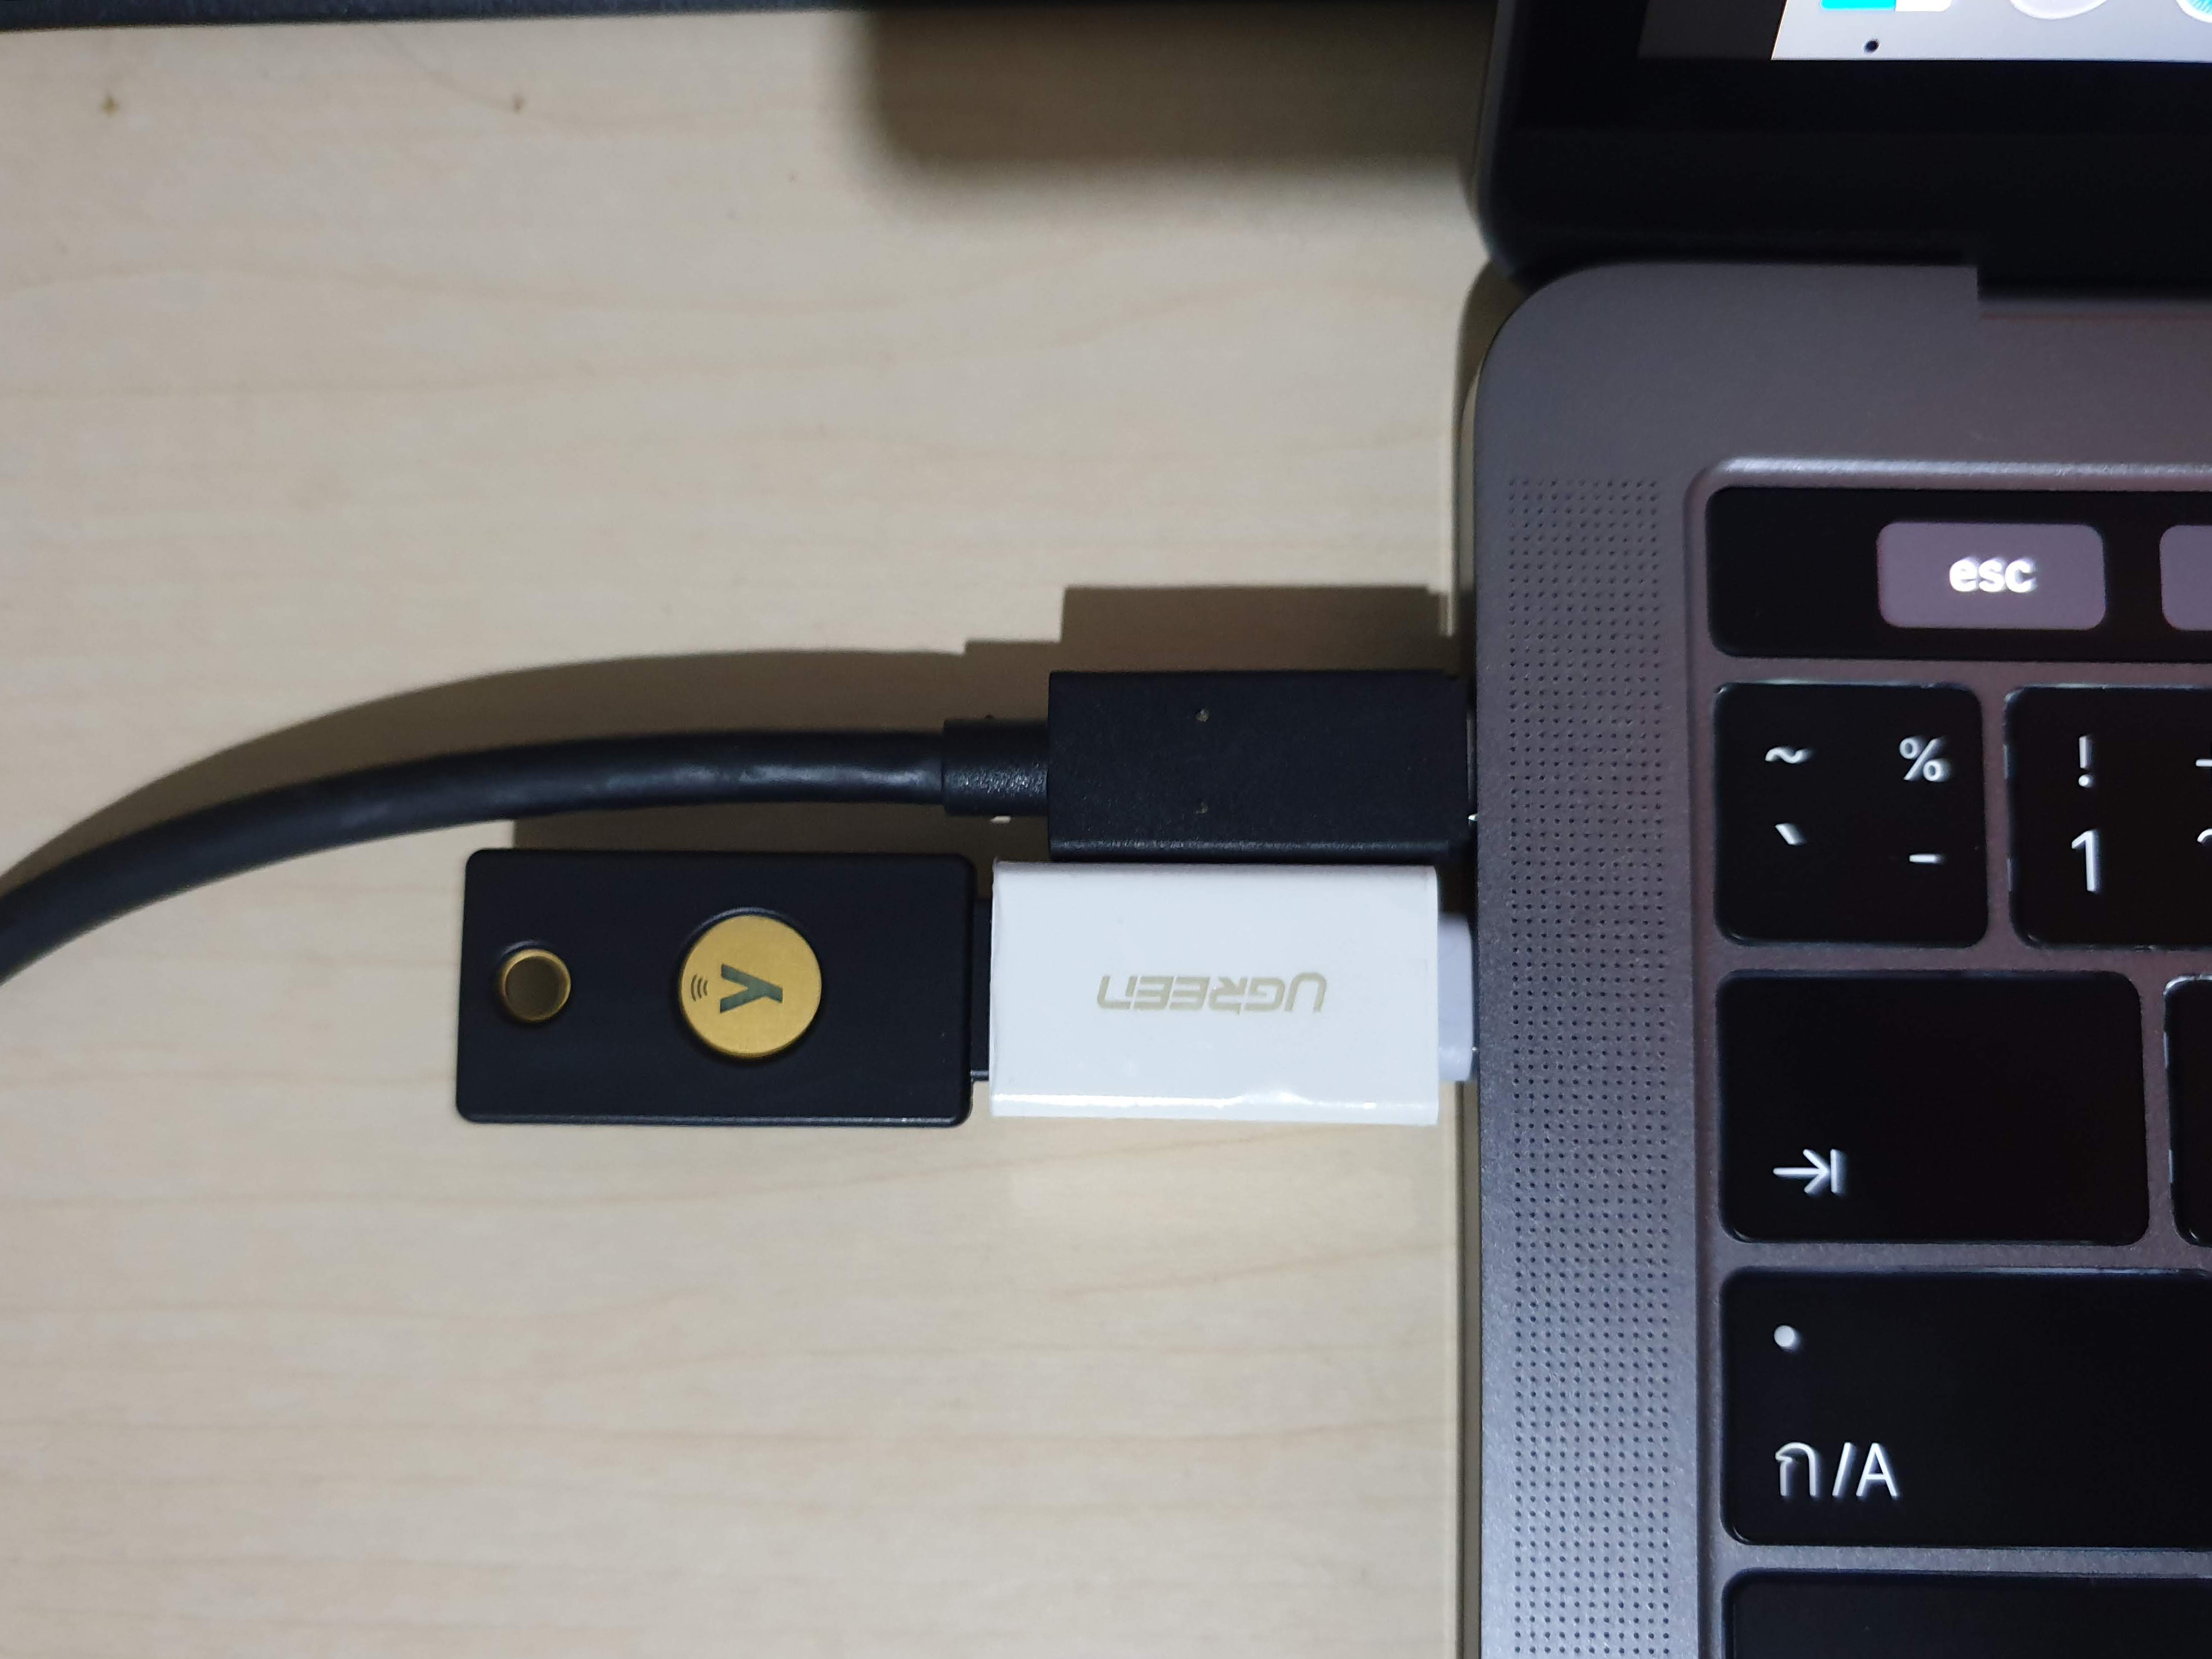 Yubikey 5 NFC Connected to MacBook Pro